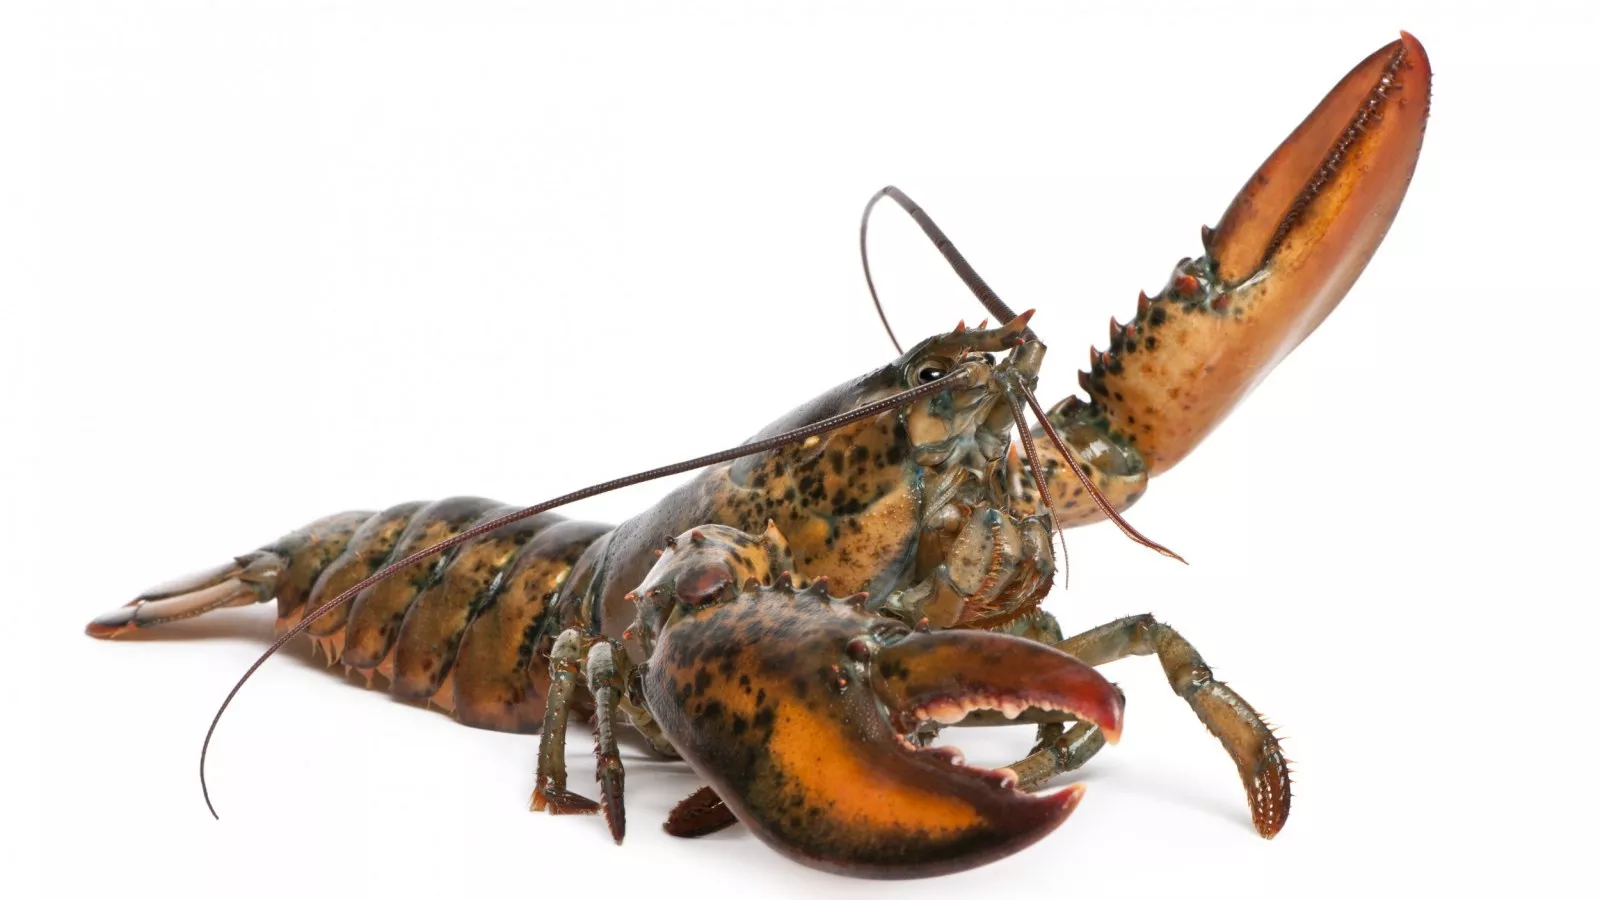 MIT: Amazingly Strong Lobster Bellies Could be Used to Build Armor